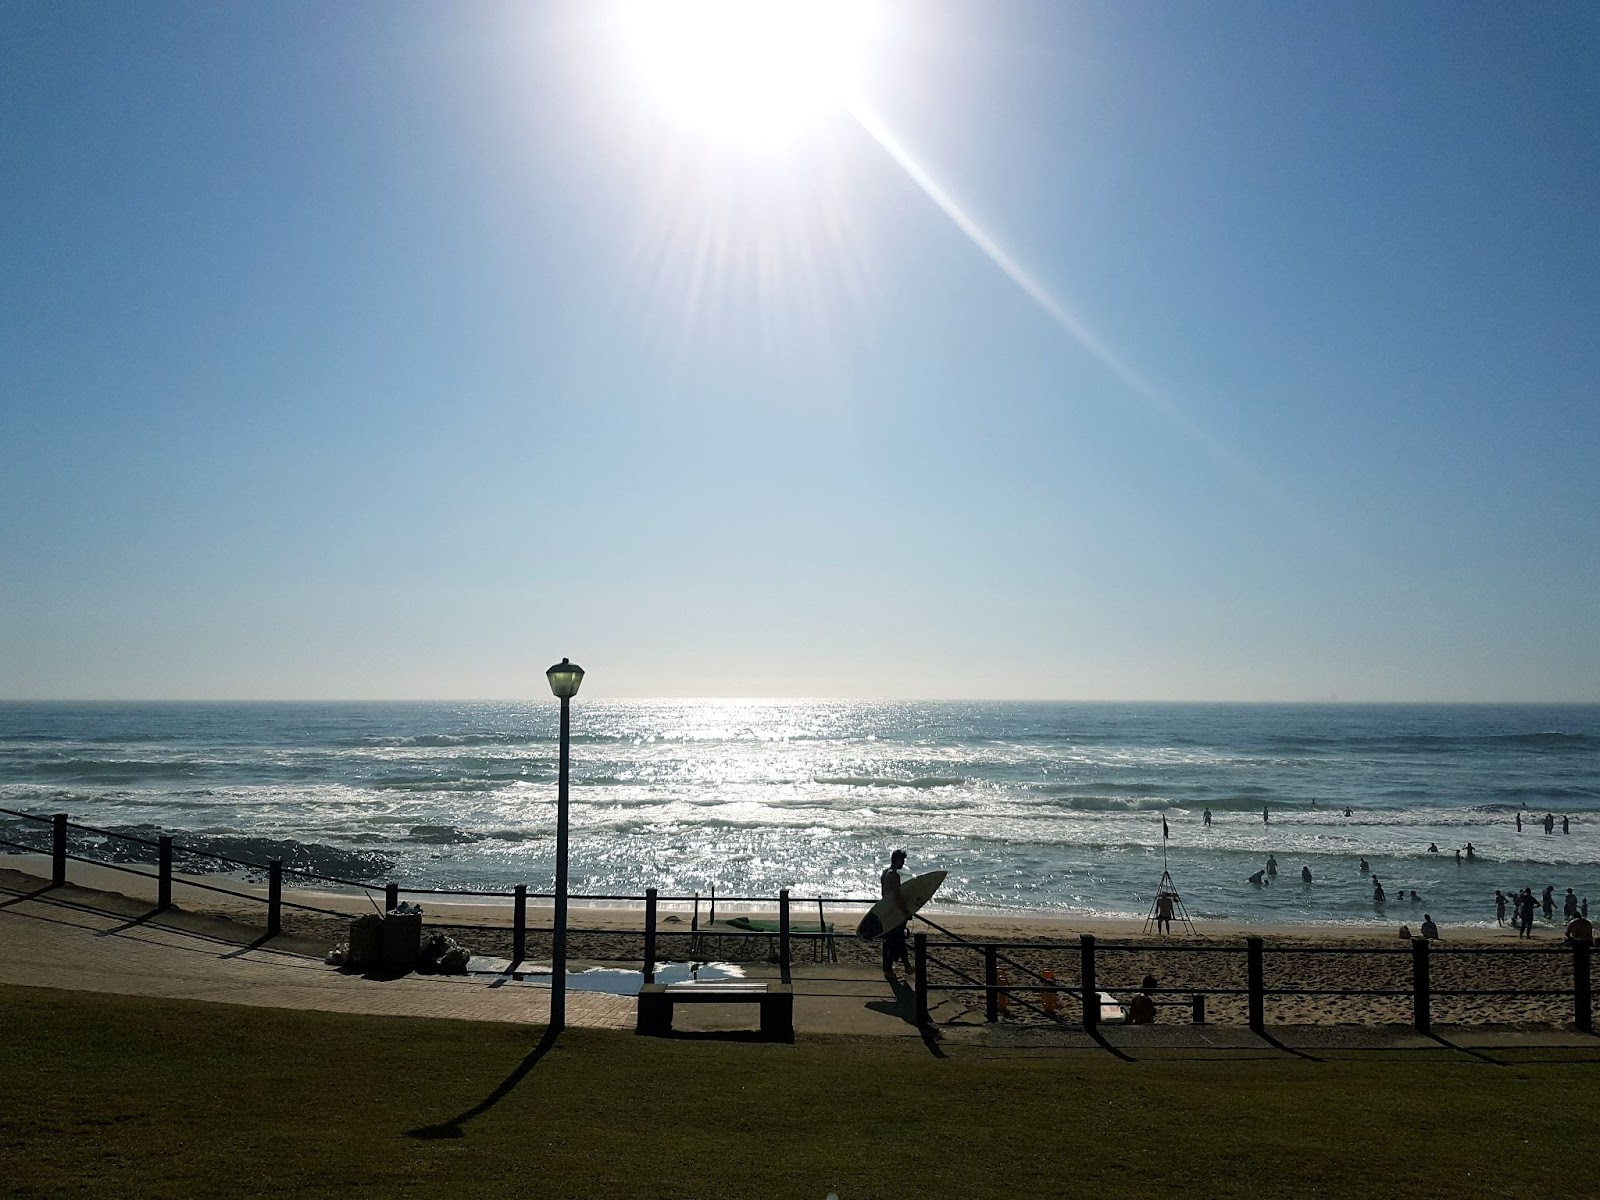 Durban’s picturesque beachfront - popular with visitors to the city